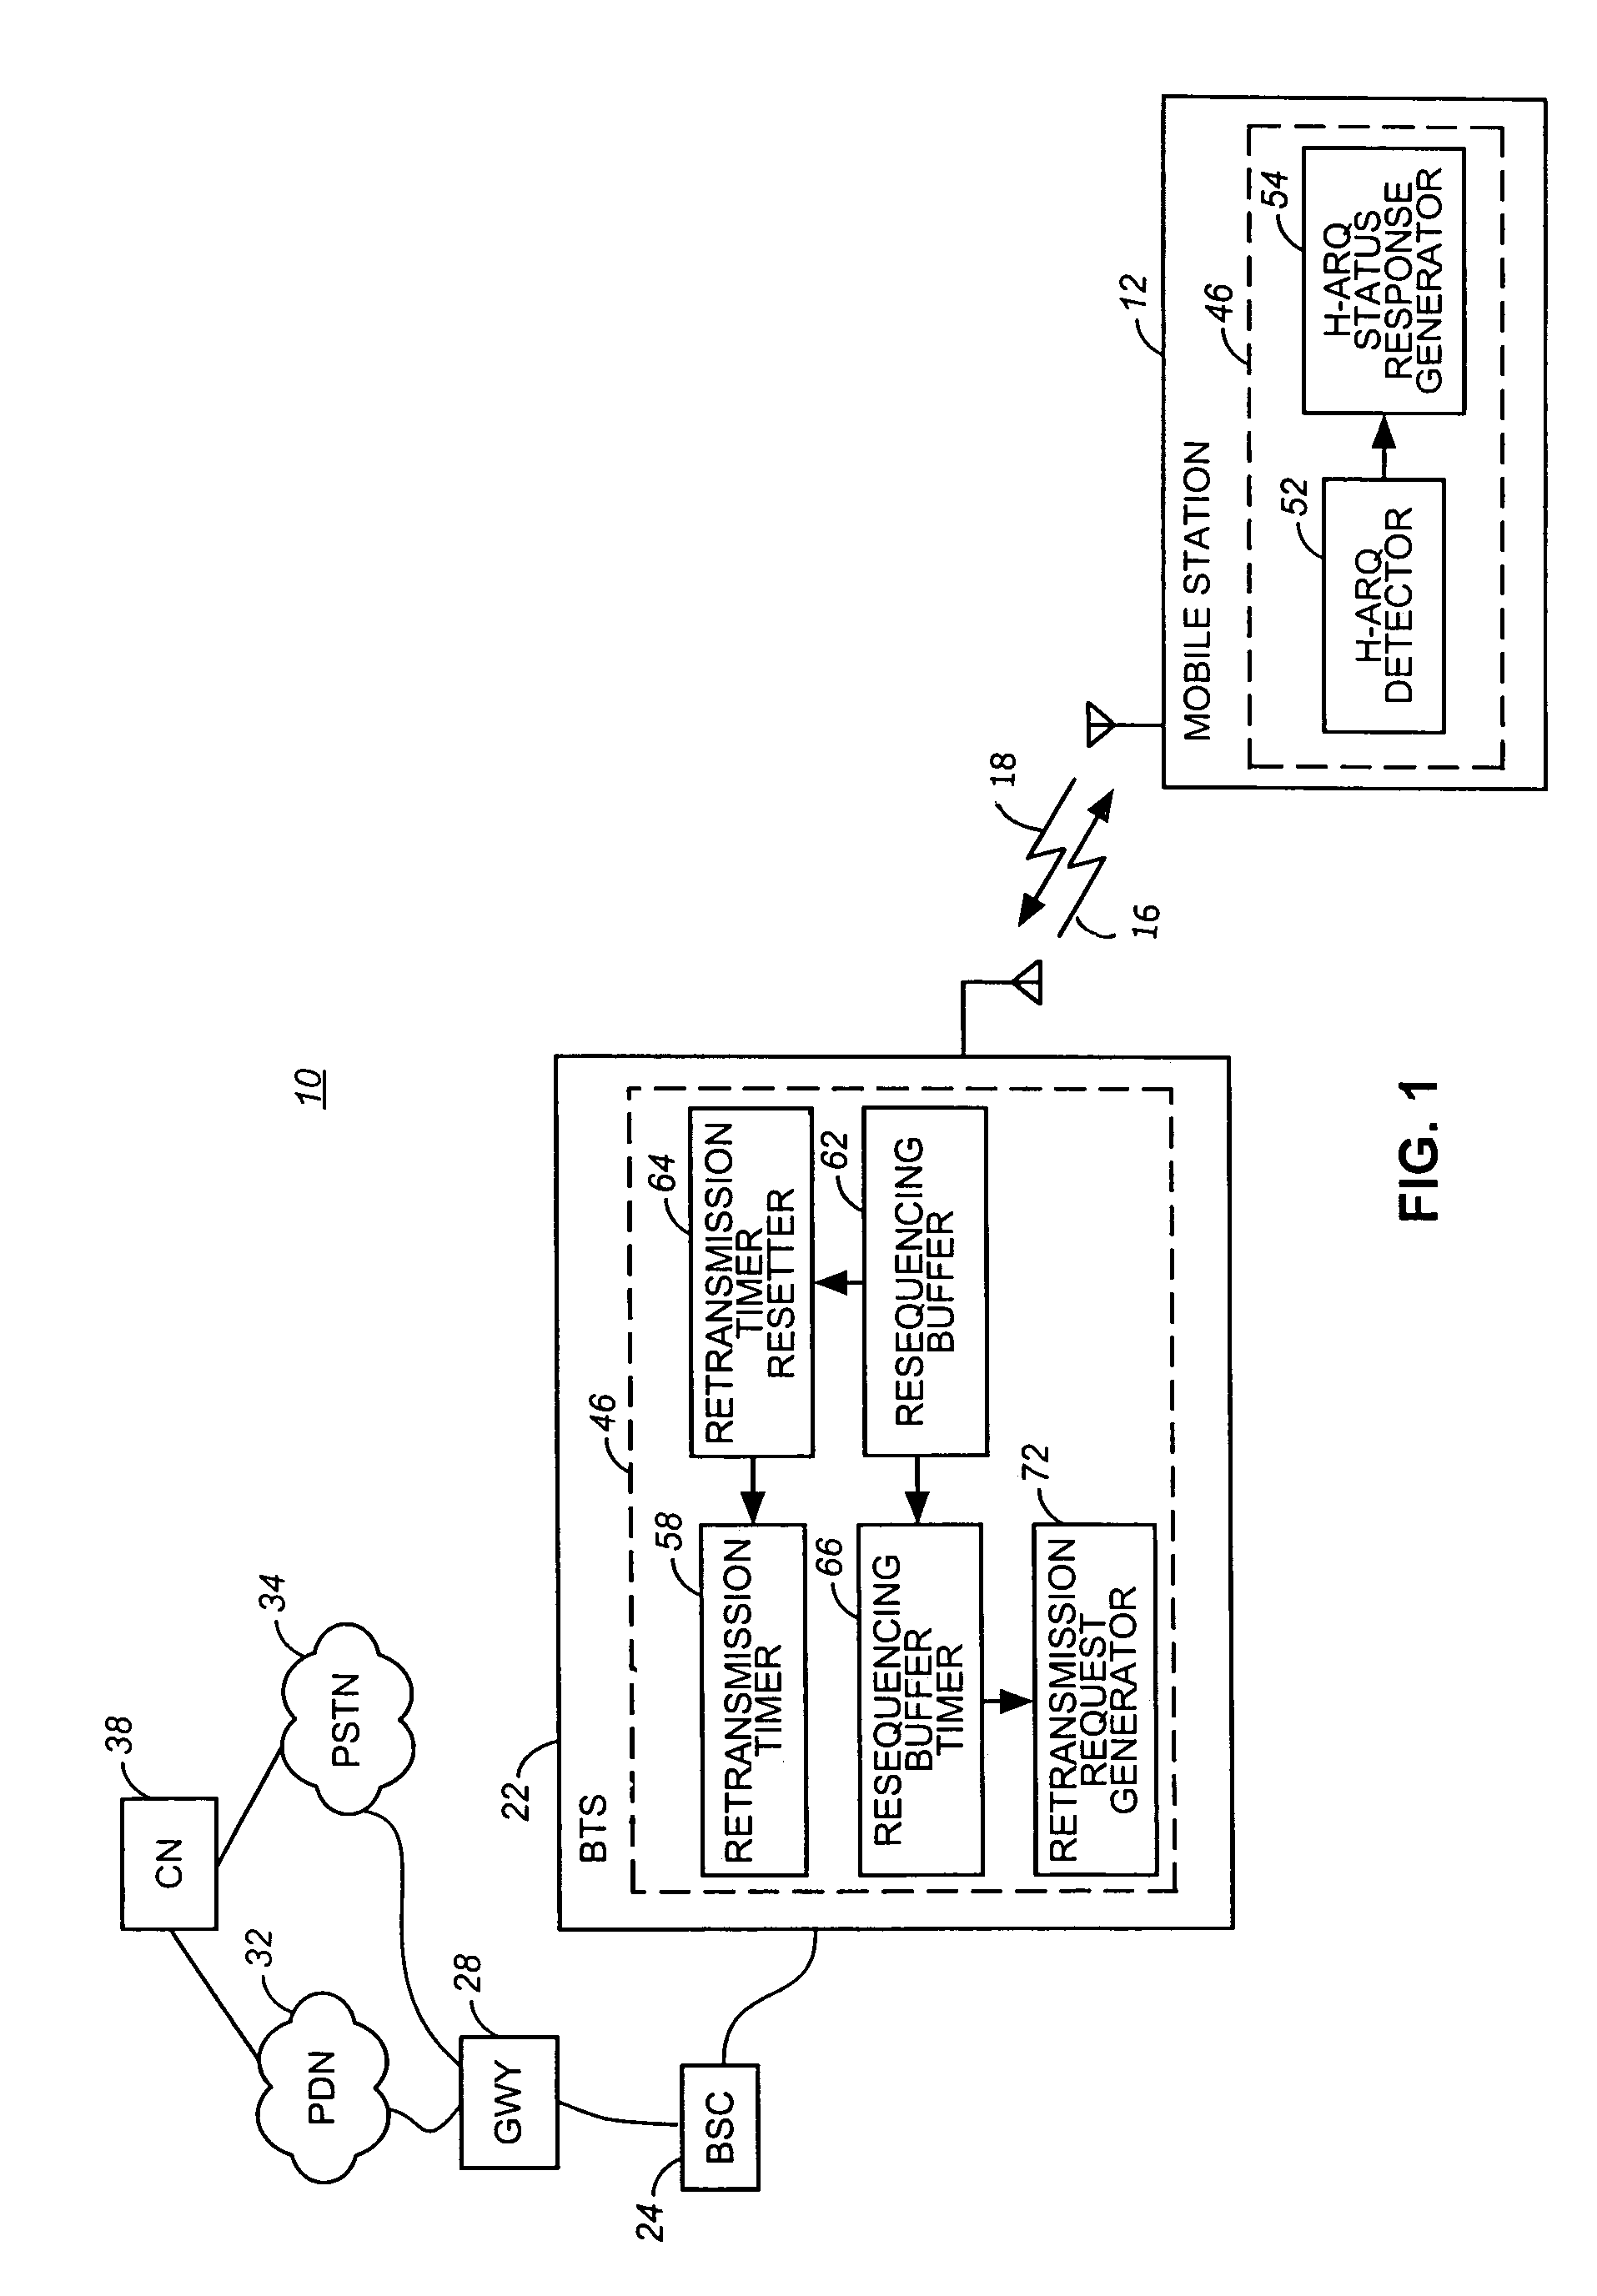 Apparatus, and associated method, for facilitating retransmission of data packets in a packet radio communication system that utilizes a feedback acknowledgement scheme